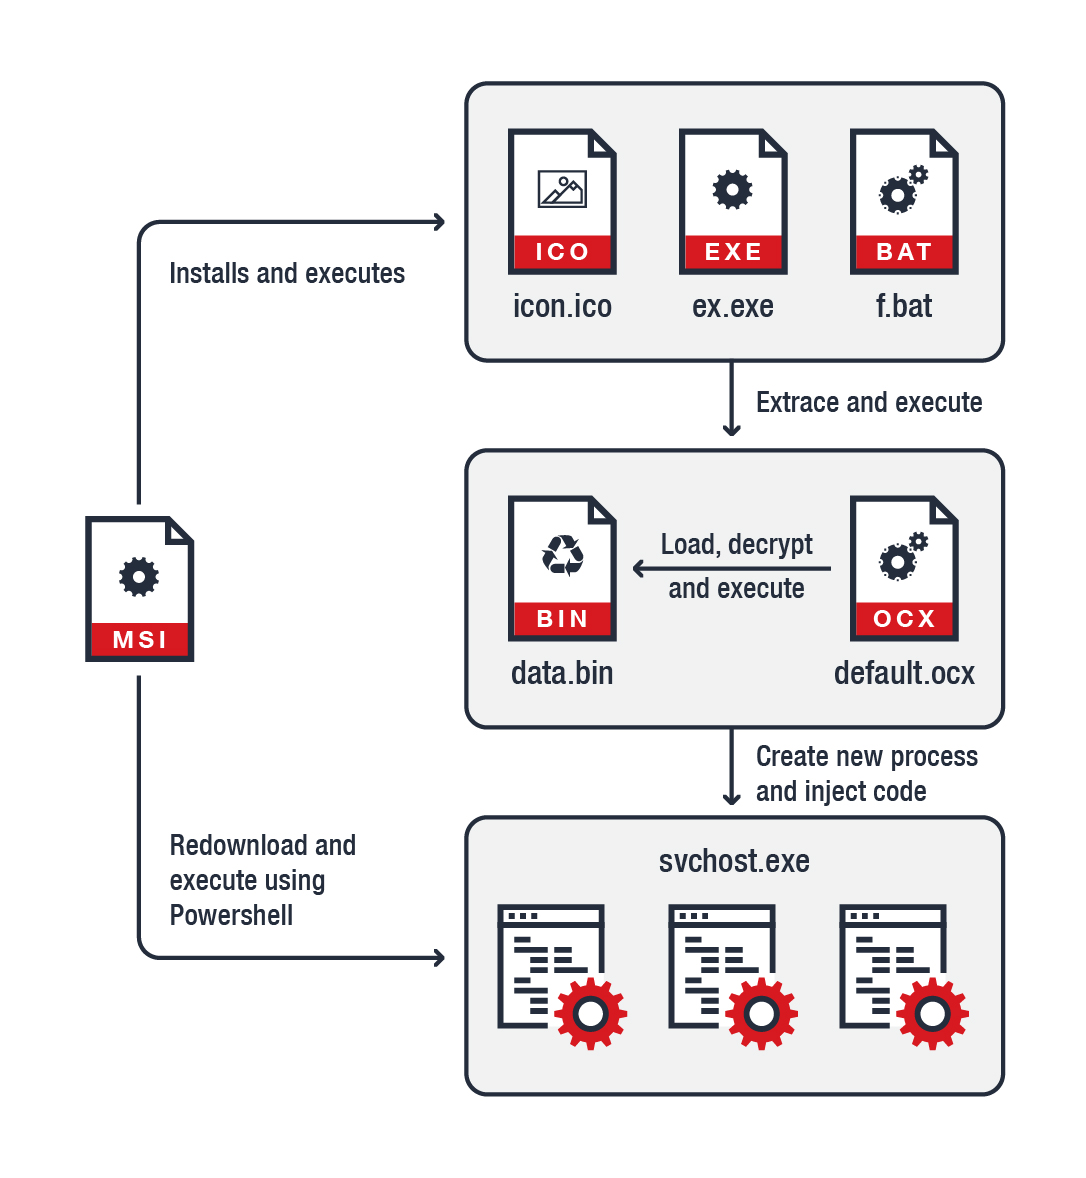  Figure 1. Infection chain for the malware